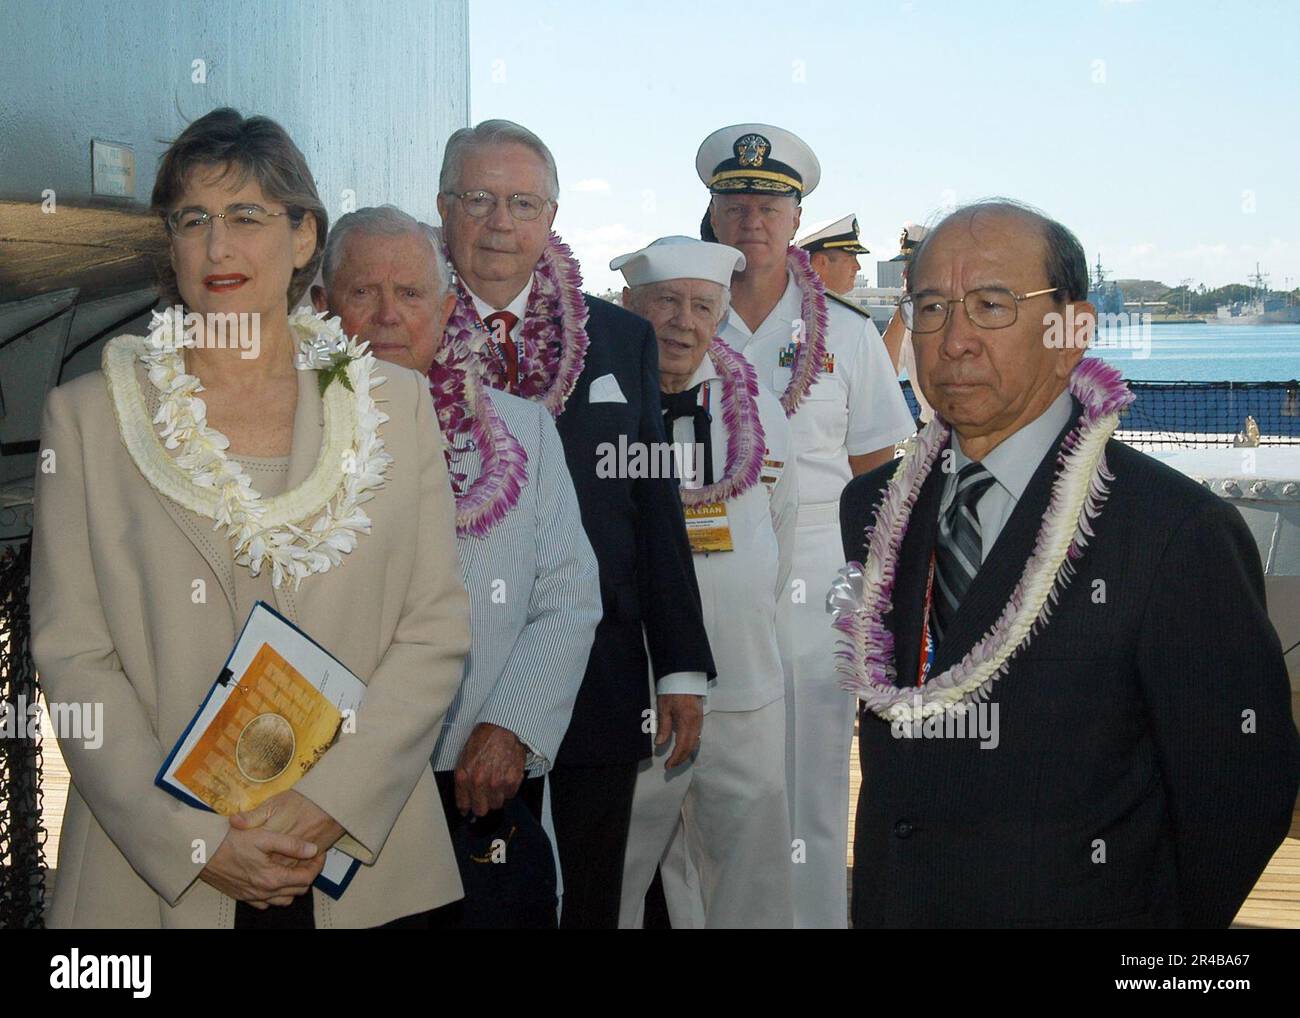 US Navy  Members of the official party, including Hawaii Gov. Linda Lingle, prepare to enter the ceremonial stage prior to the start of the 60th Anniversary of the end of World War II held aboard the USS Misso. Stock Photo